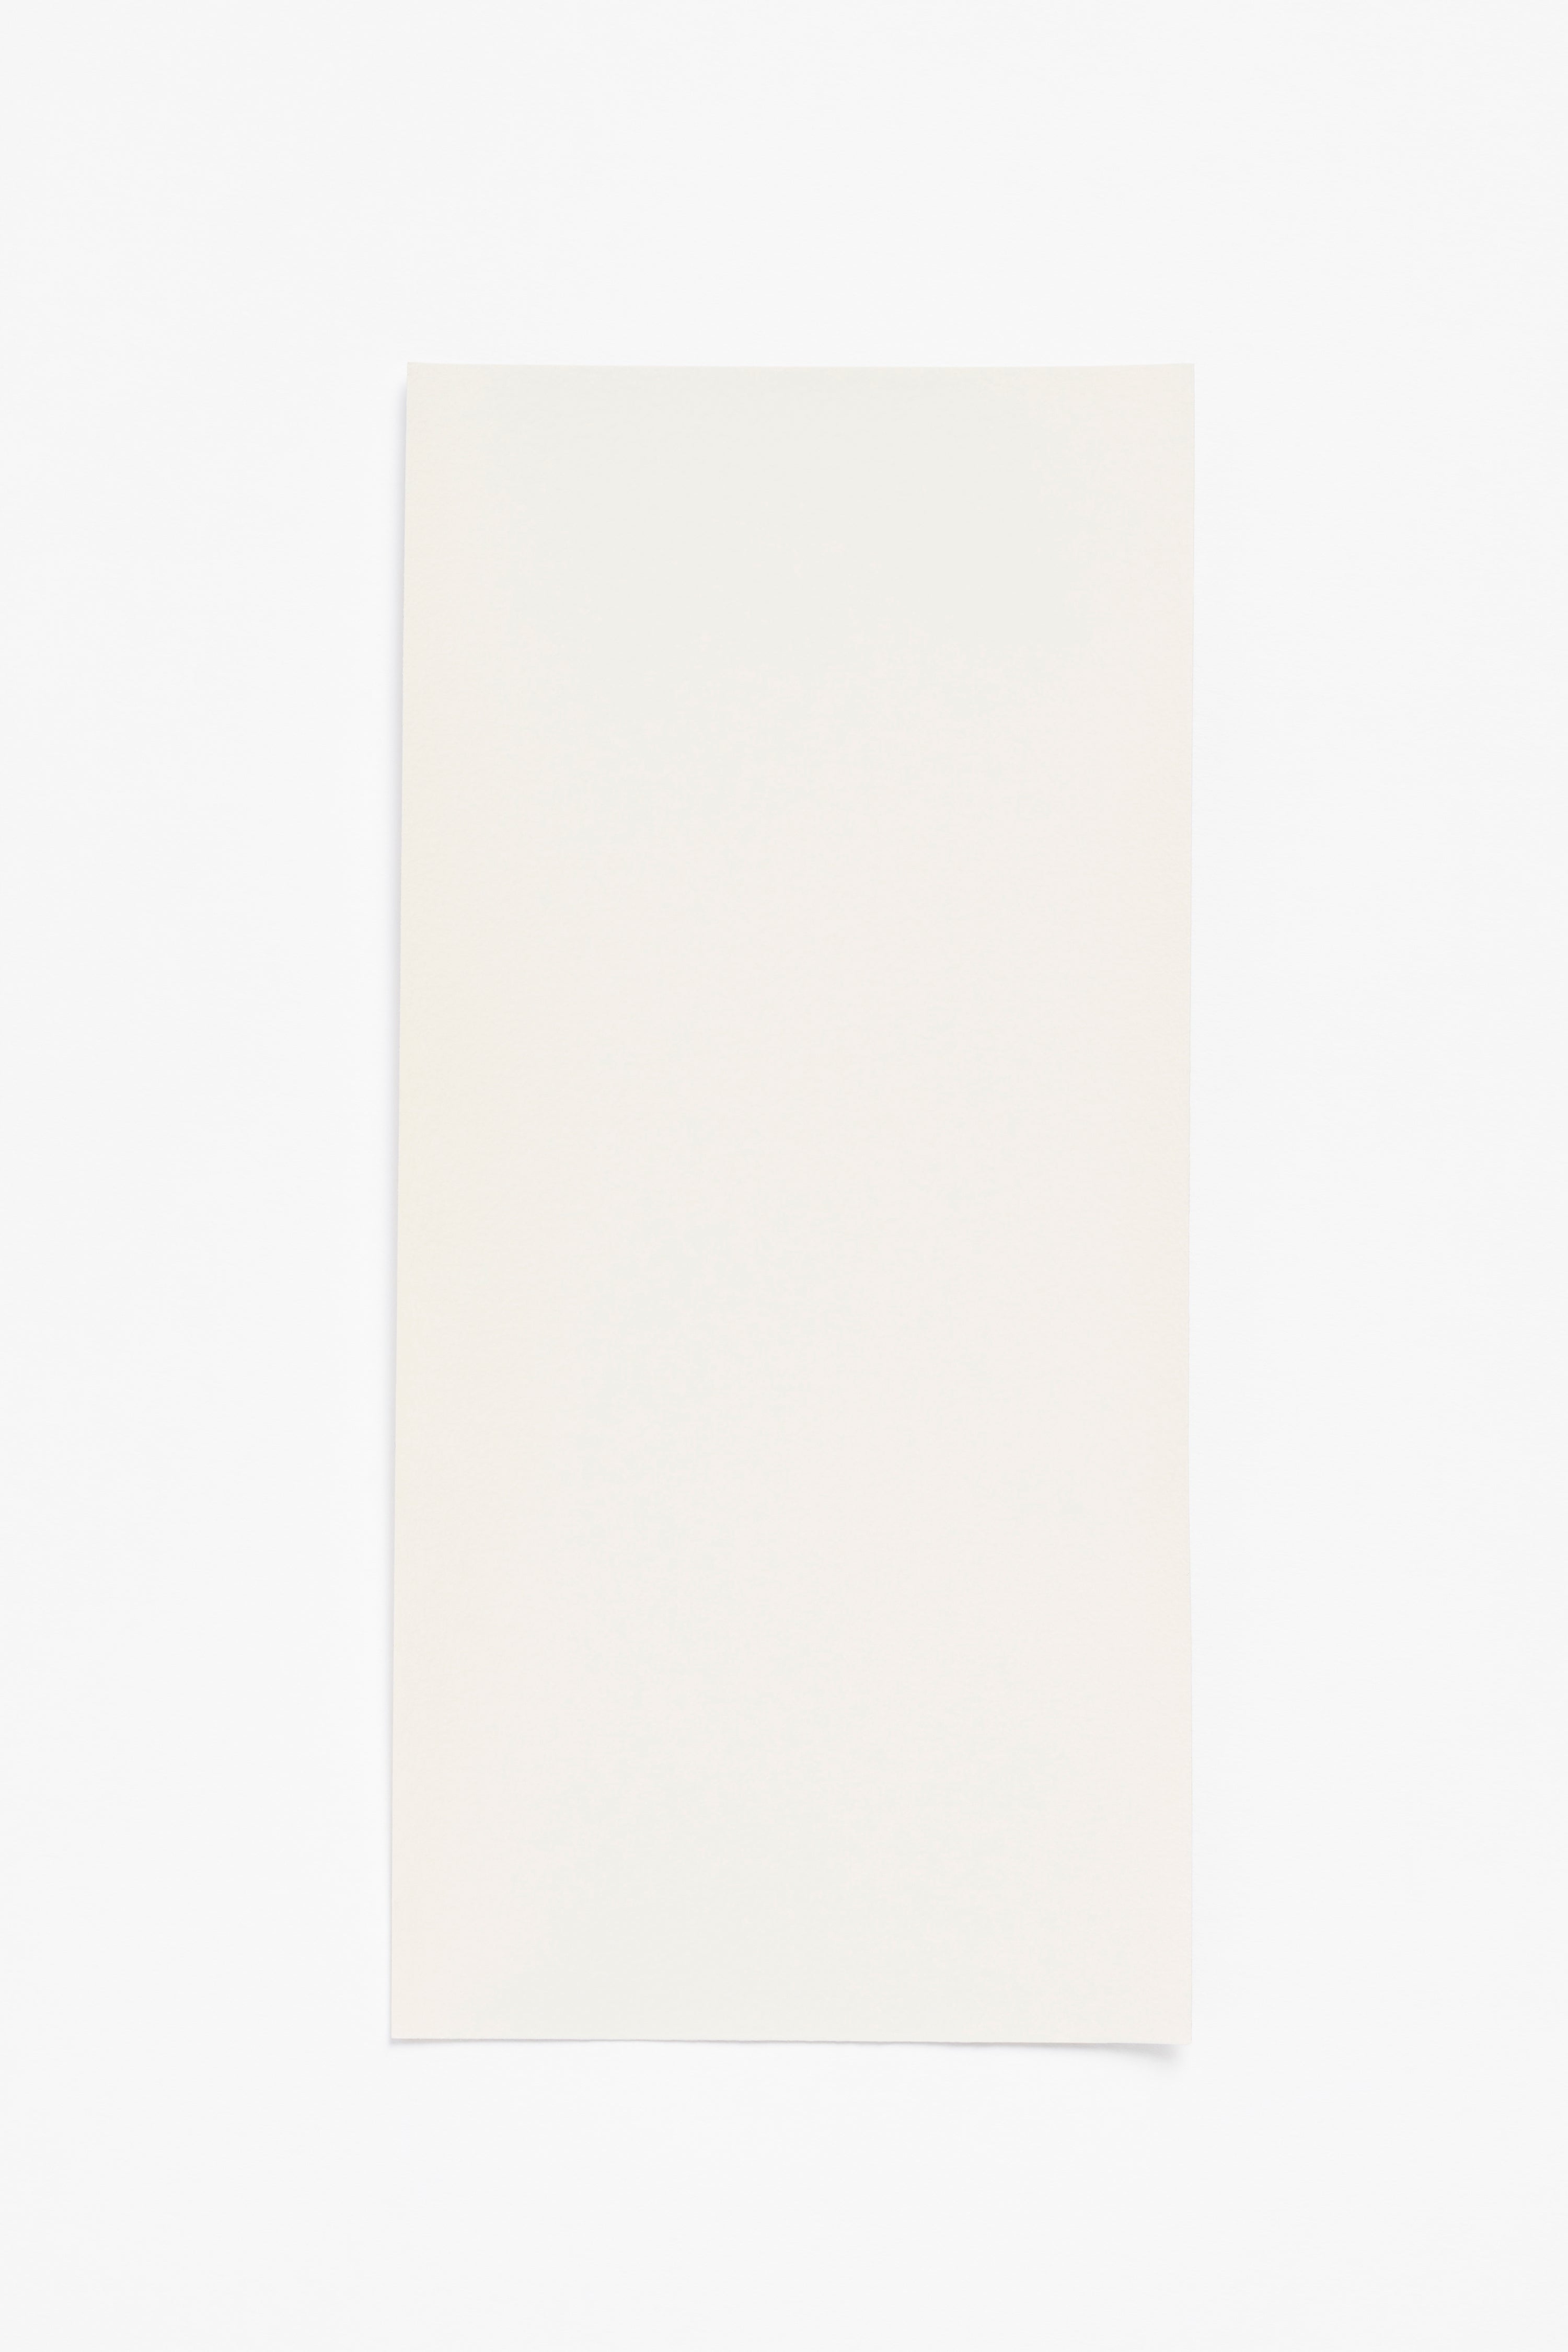 Sheer Curtain White — a paint colour developed by Norm Architects for Blēo